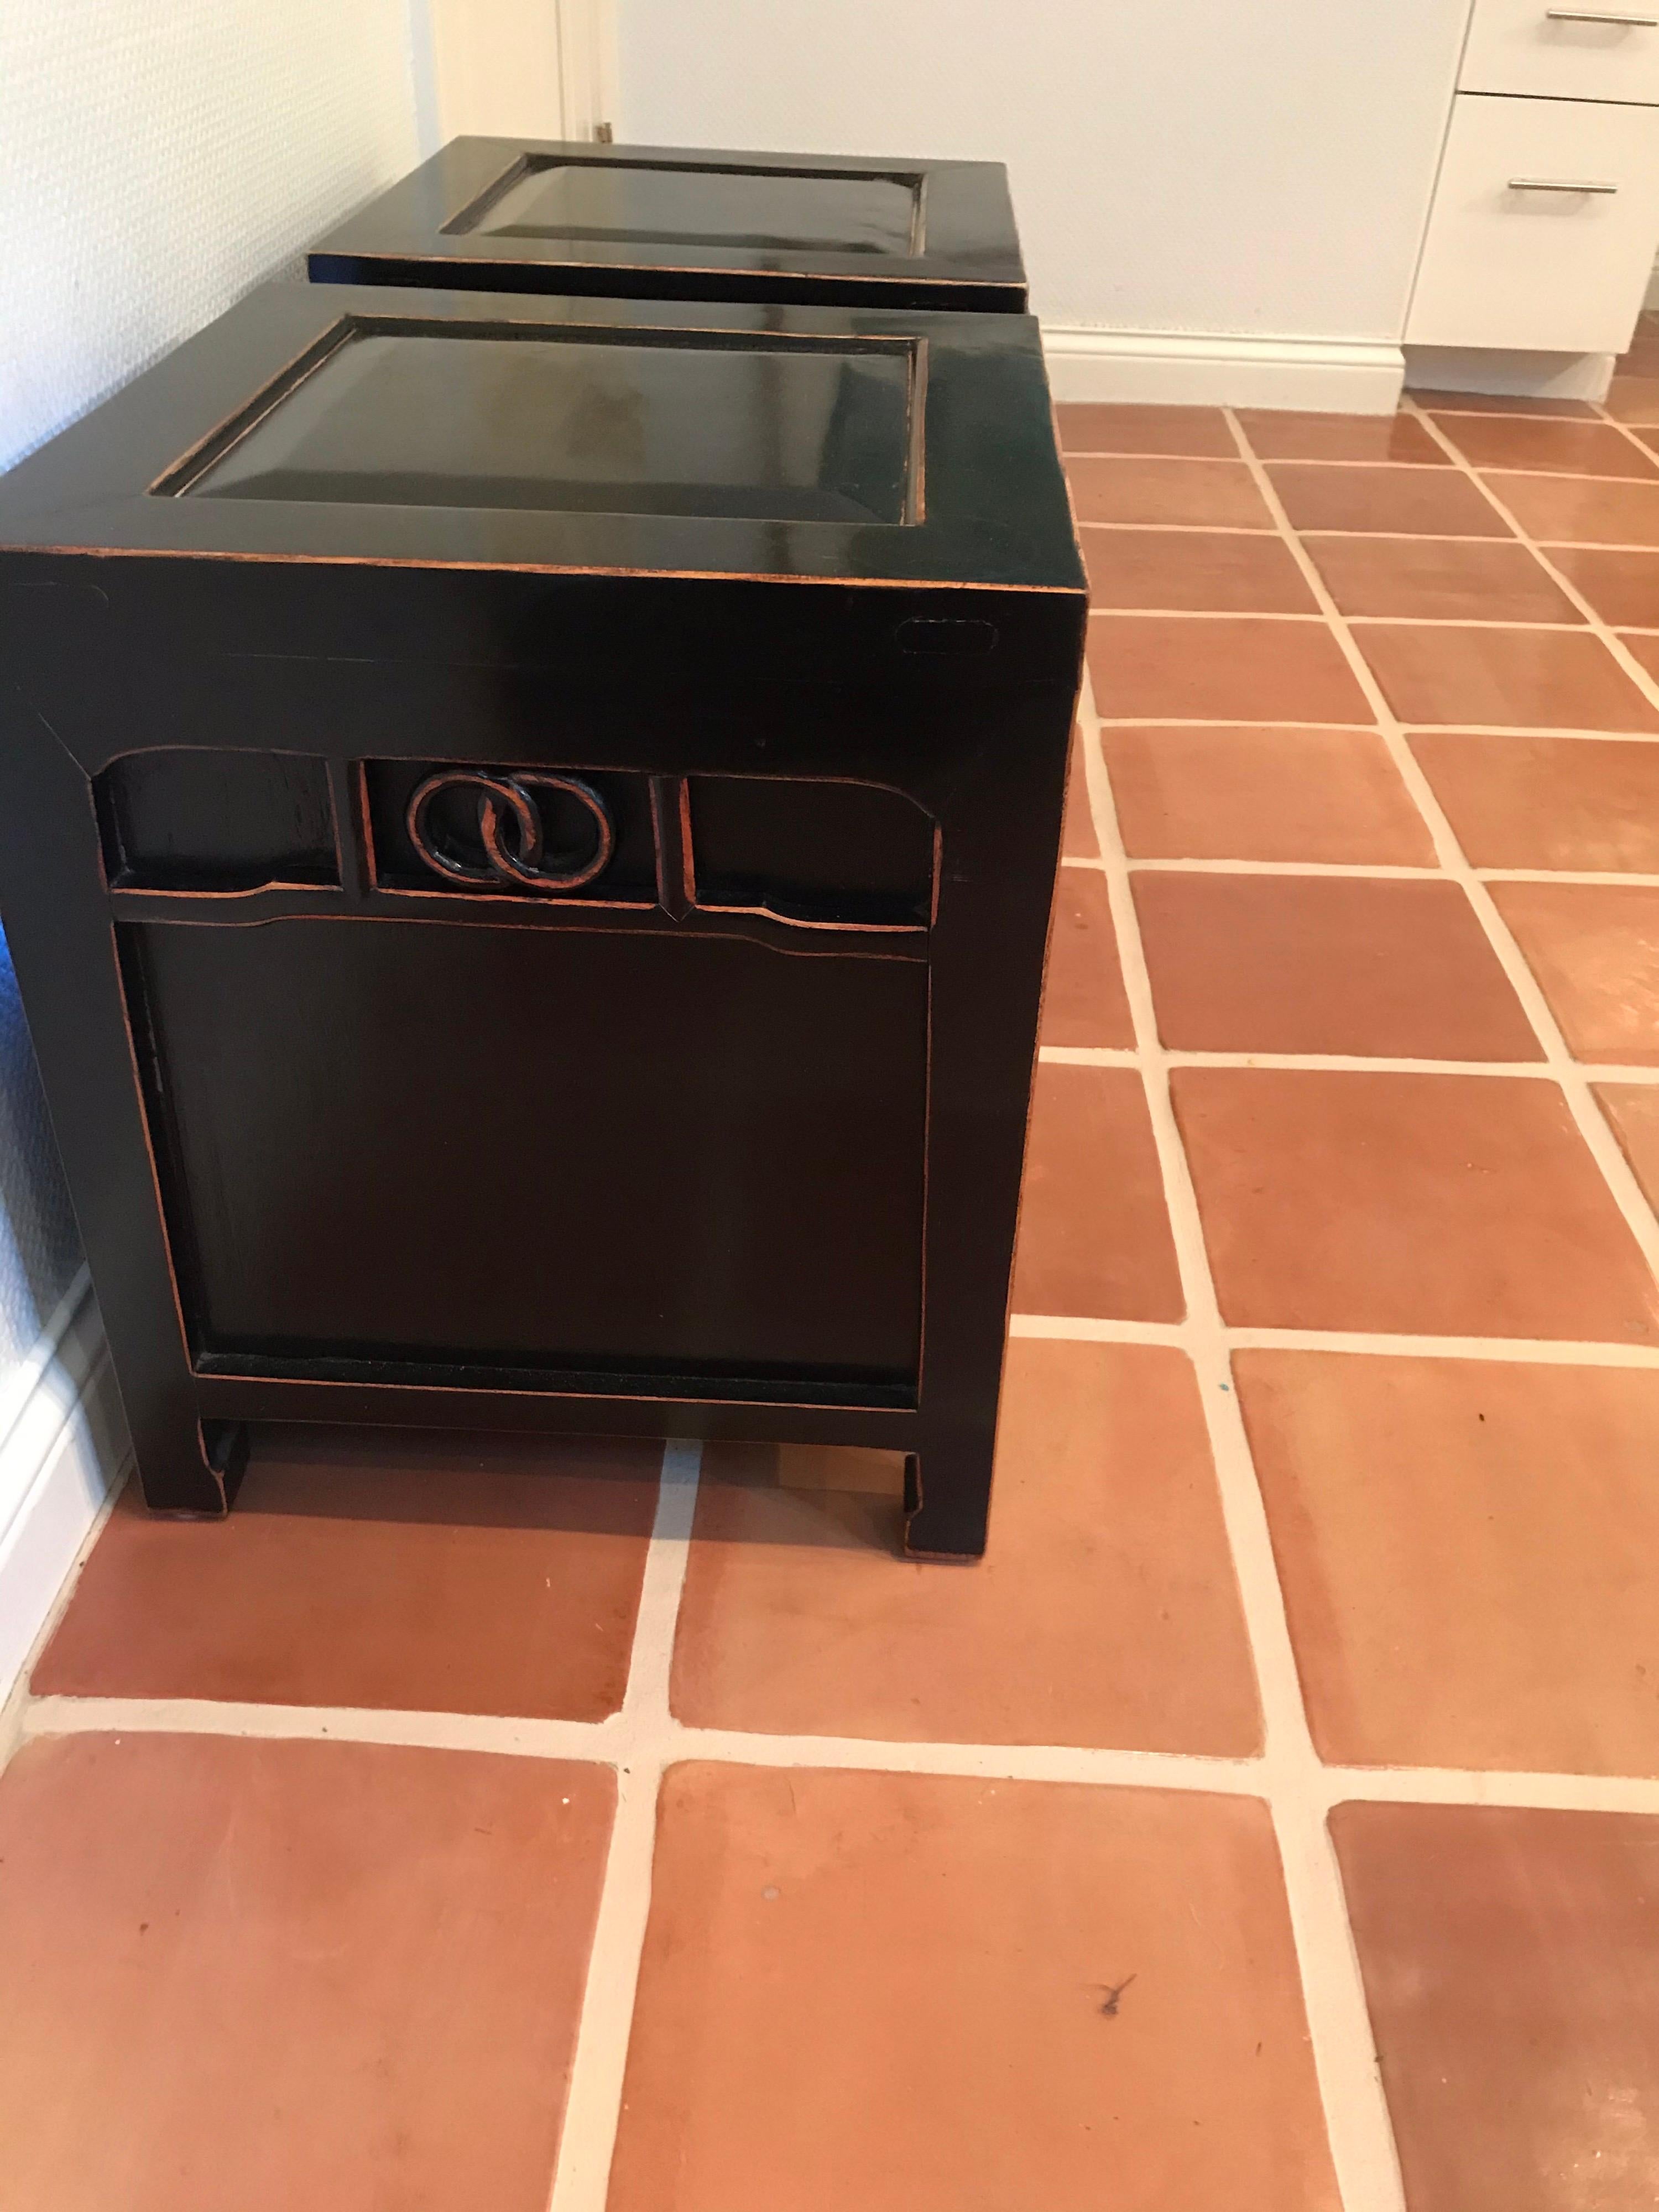 This is a pair of black lacquered wood end tables or nightstands 
Have two drawers in each table and are well constructed 
They have an Asian inspired look.